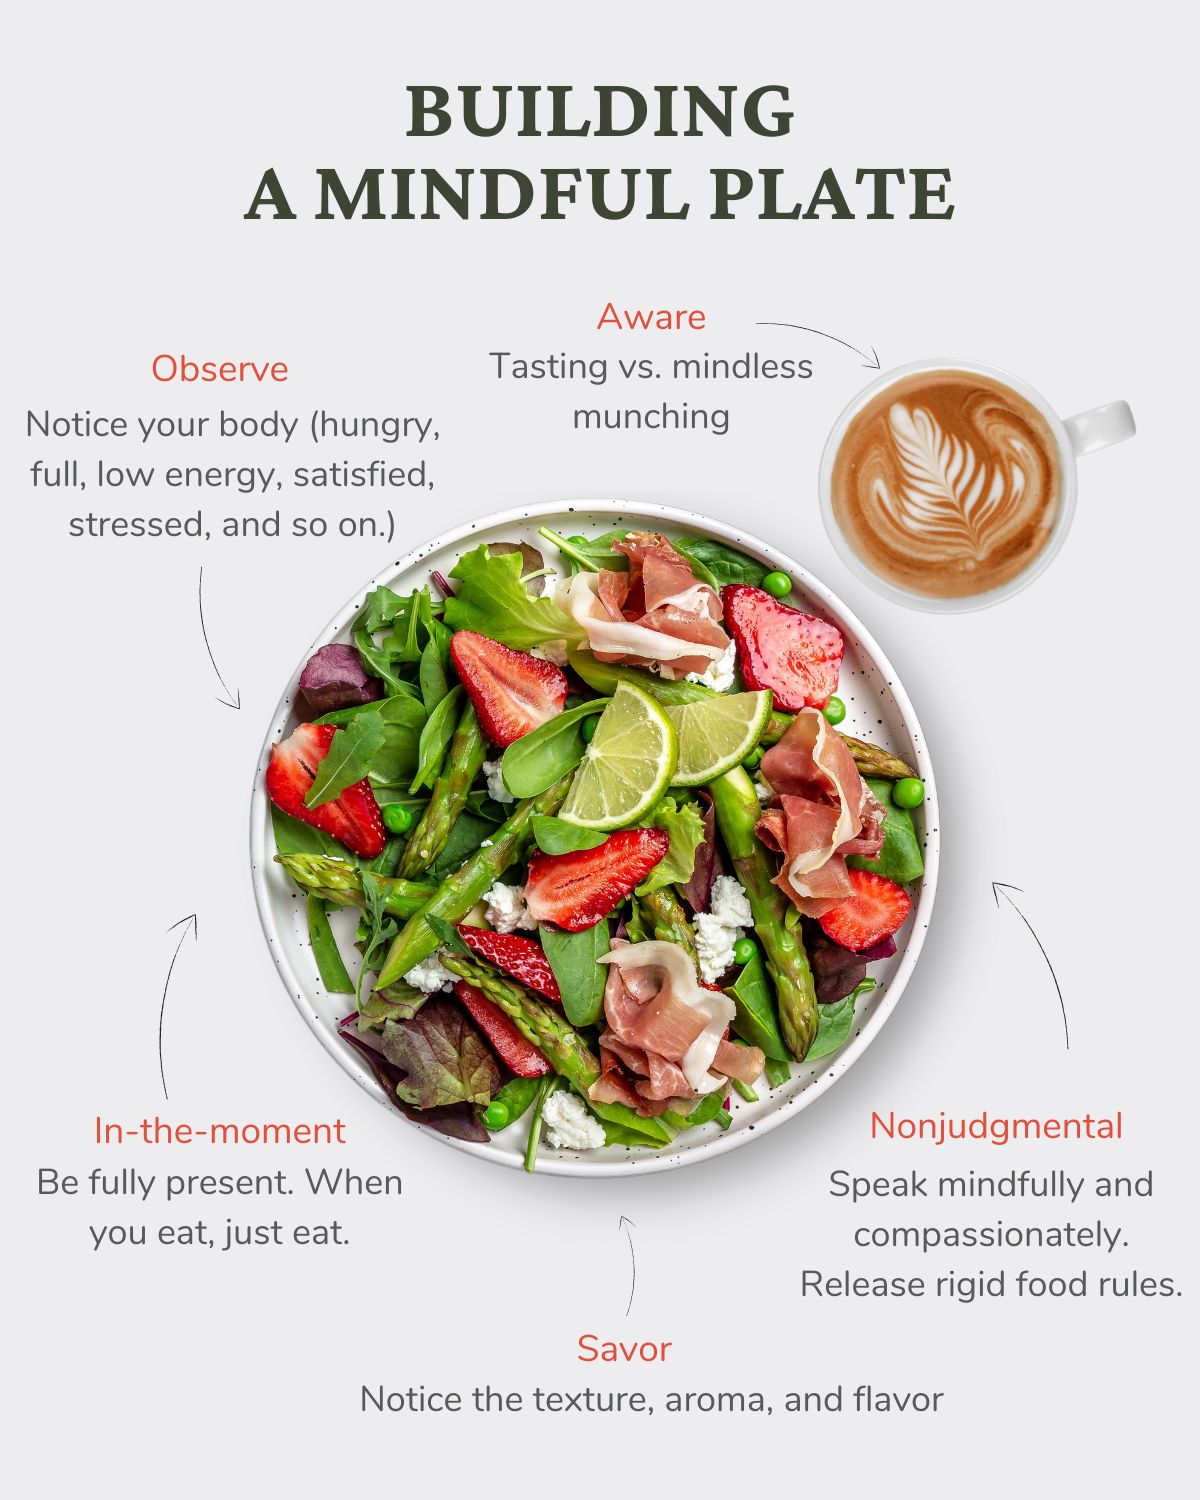 Visual of the mindful eating plate